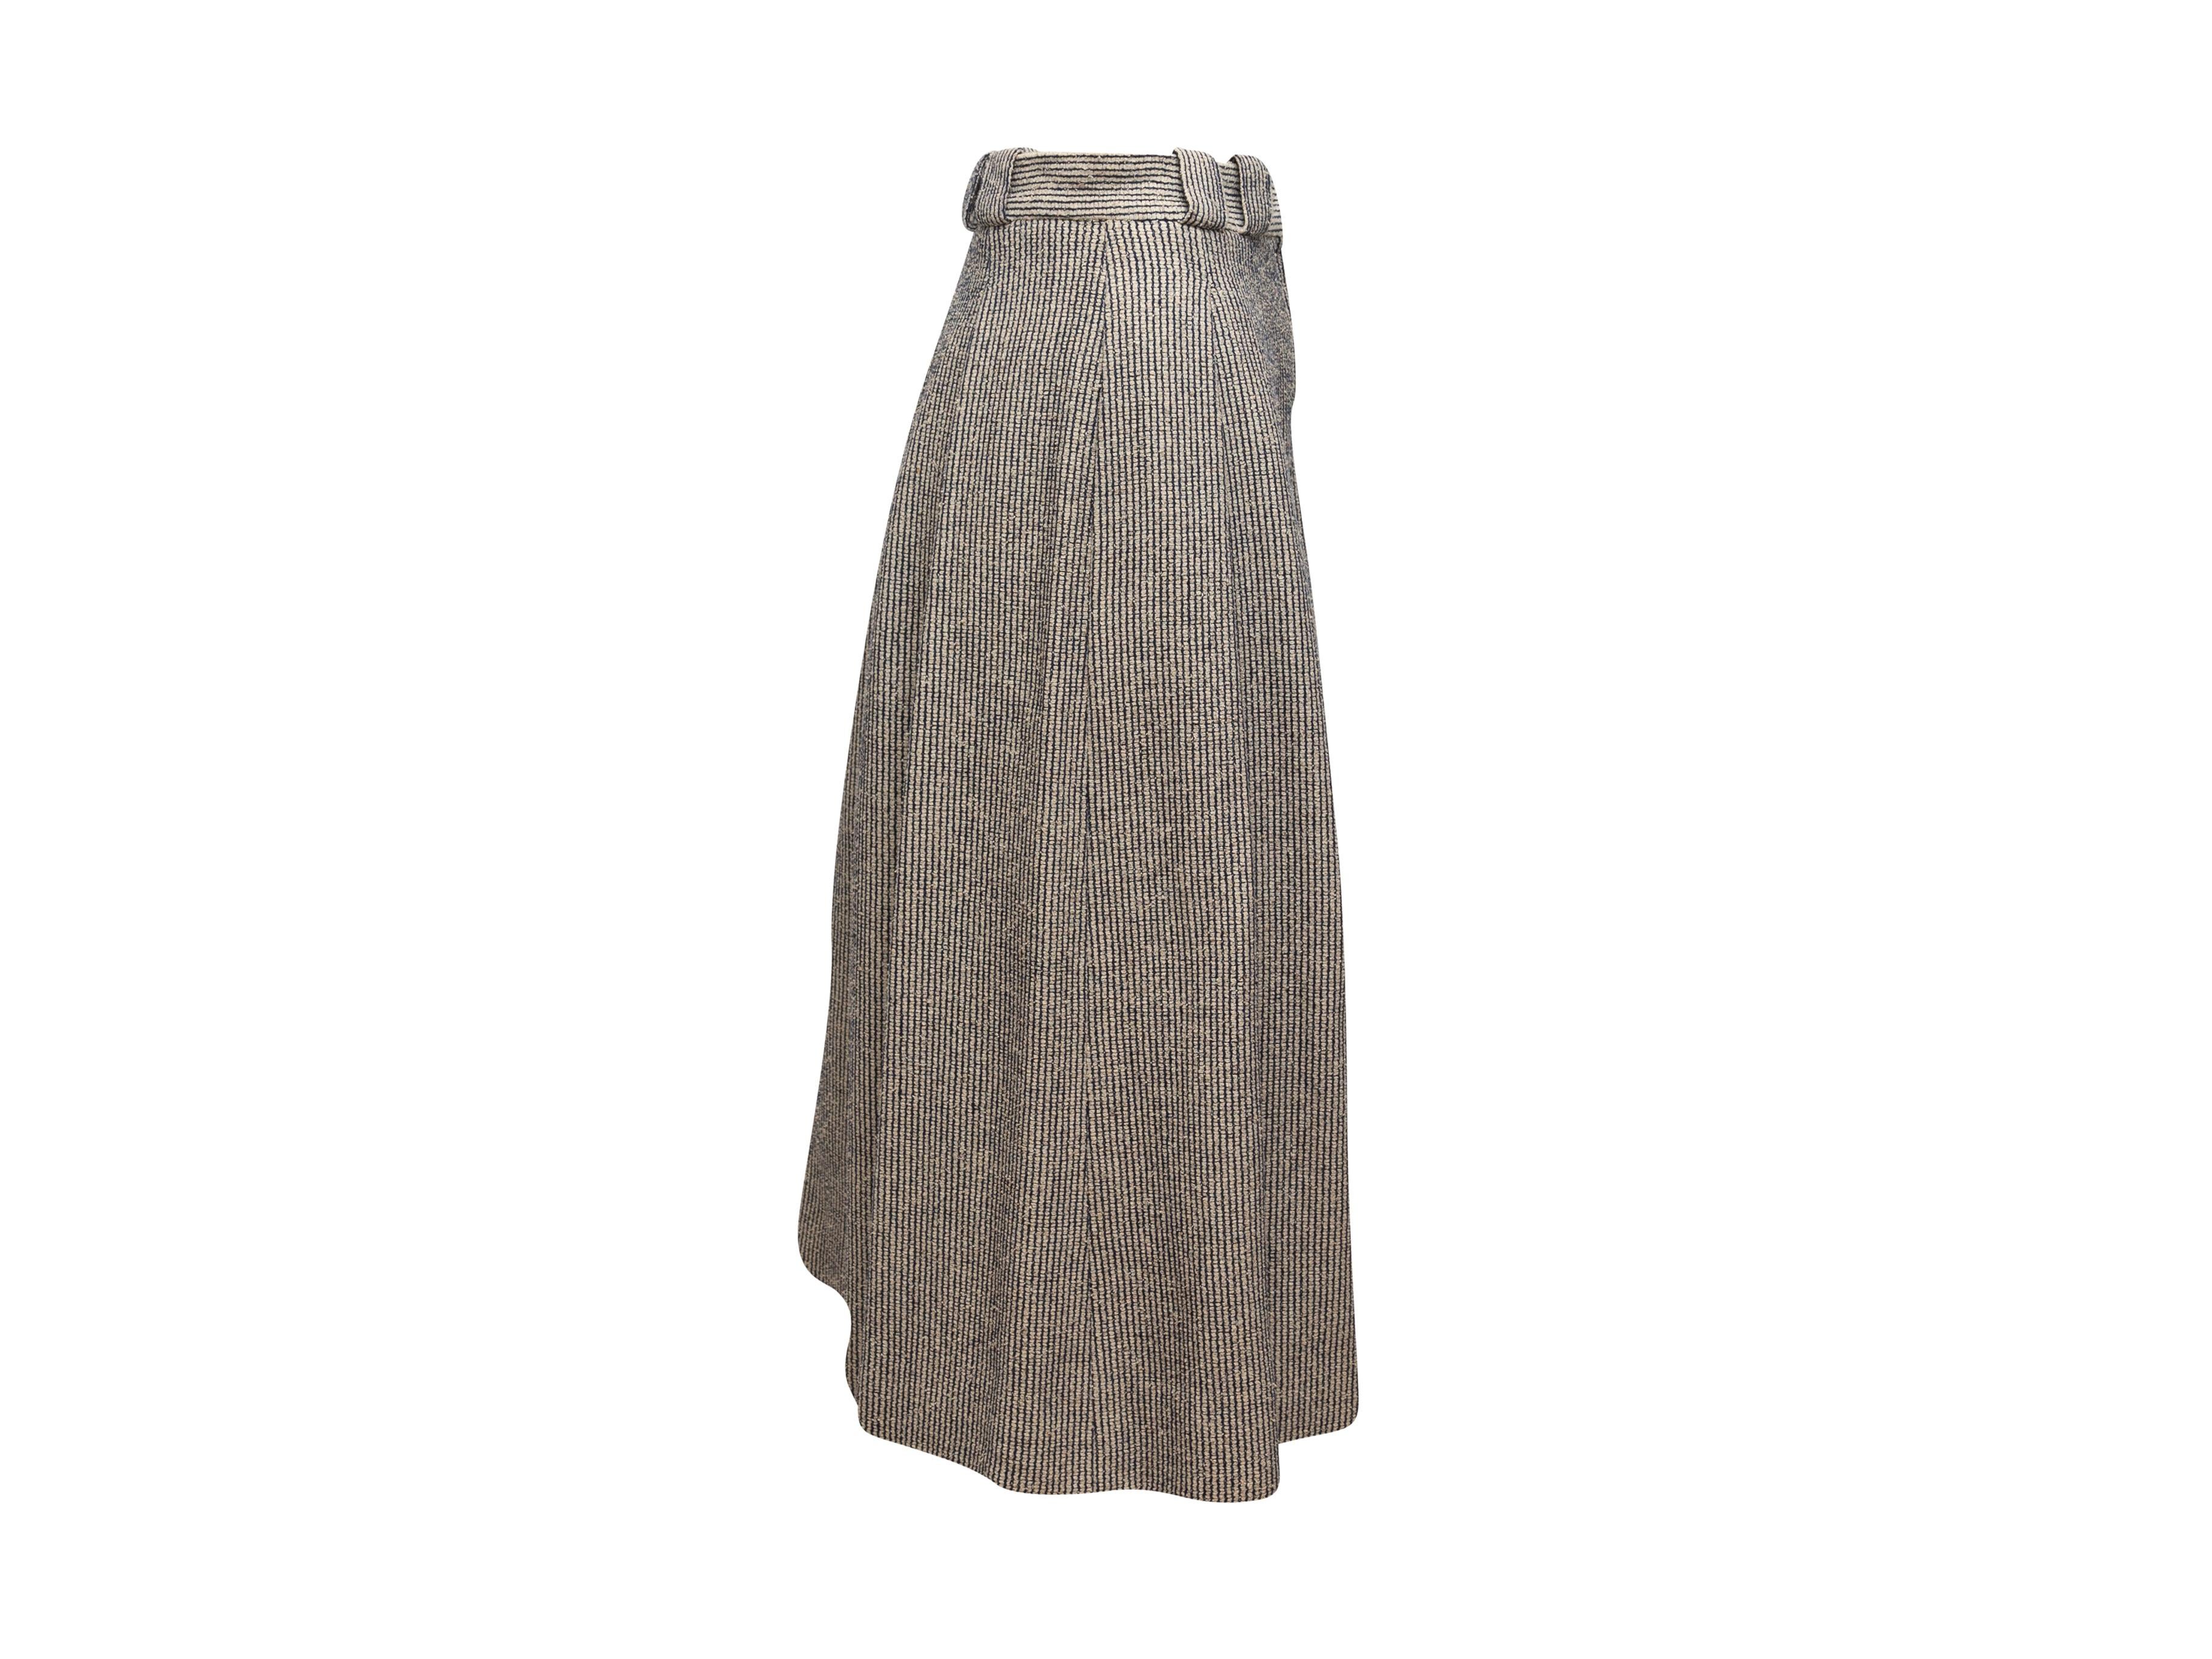 Product details: Vintage navy and white tweed pleated skirt by Chanel. Belt loops at waist. Zip closure at side. 26